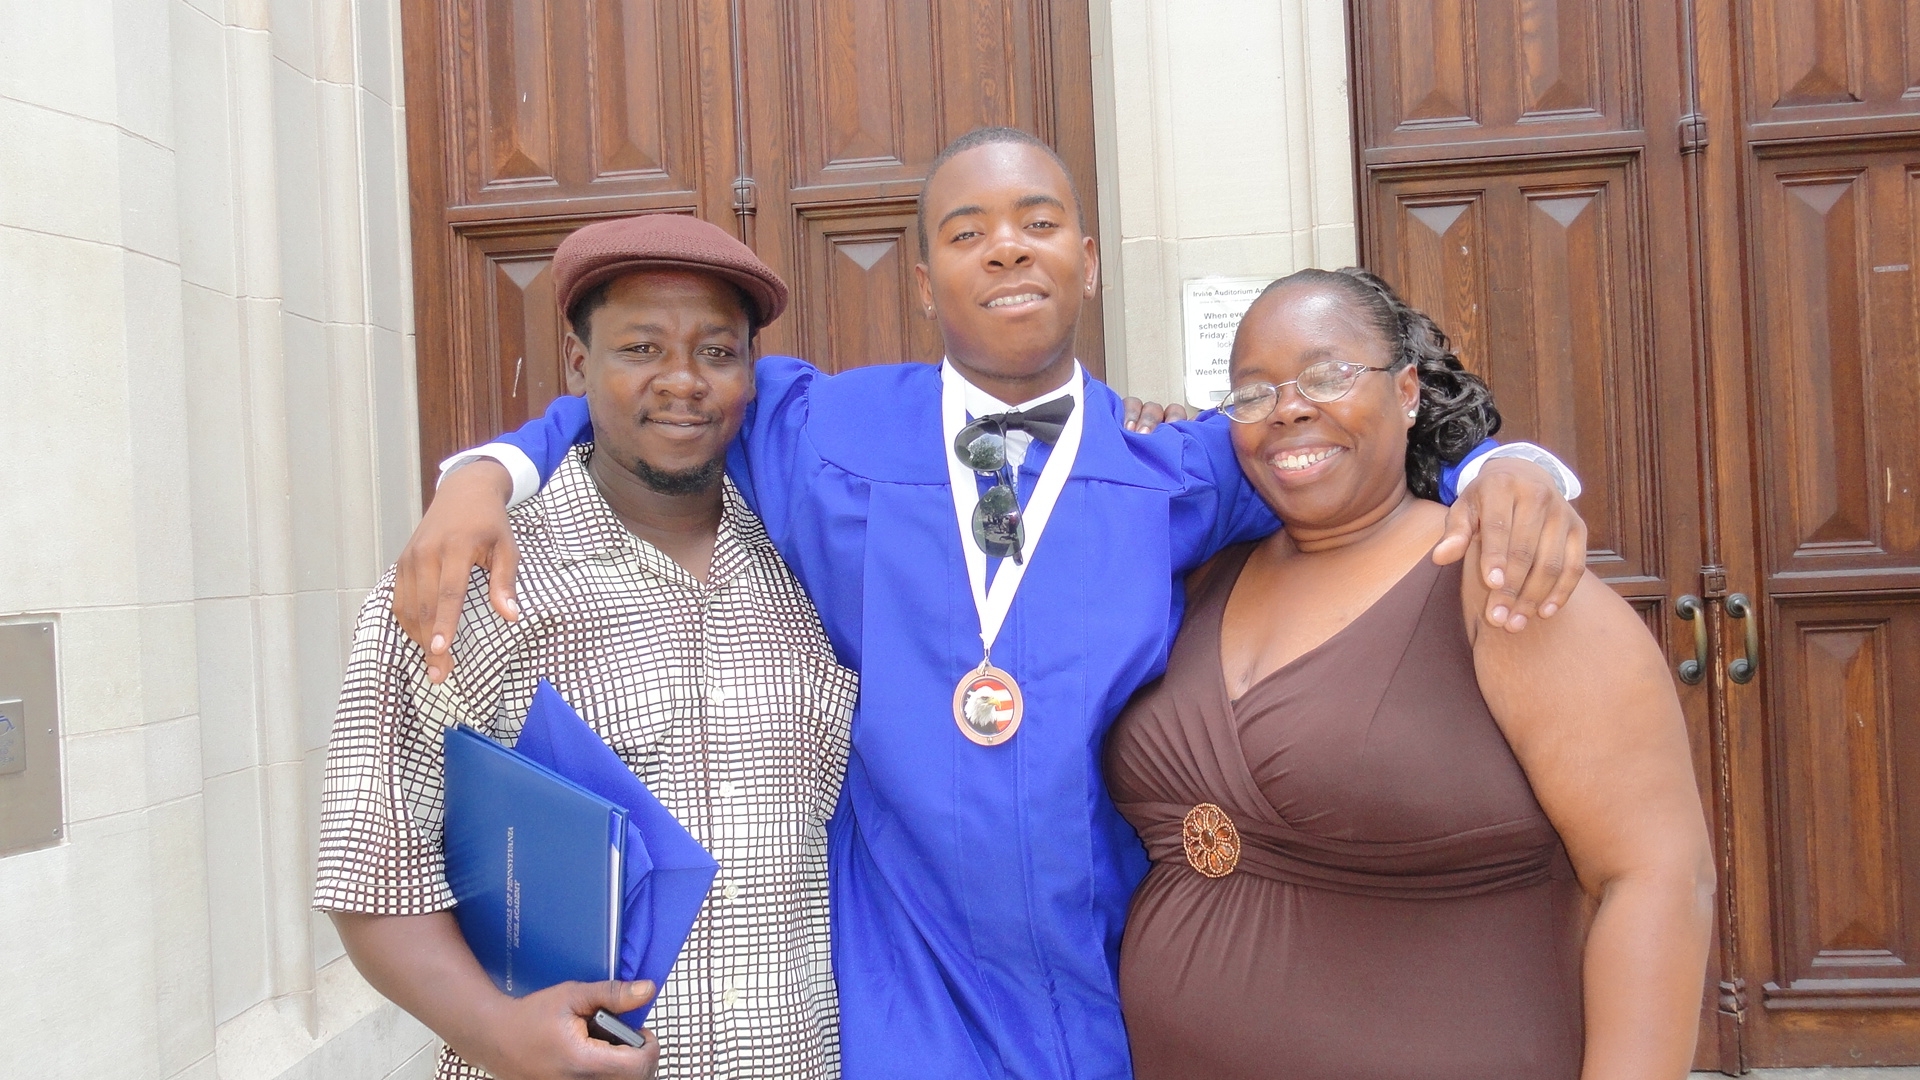 Jacques Cherry celebrates his graduation from Excel Academy with his parents Everett Taylor and Reba Cherry. Photo courtesy of Ceislet Media & Issue Advocacy.